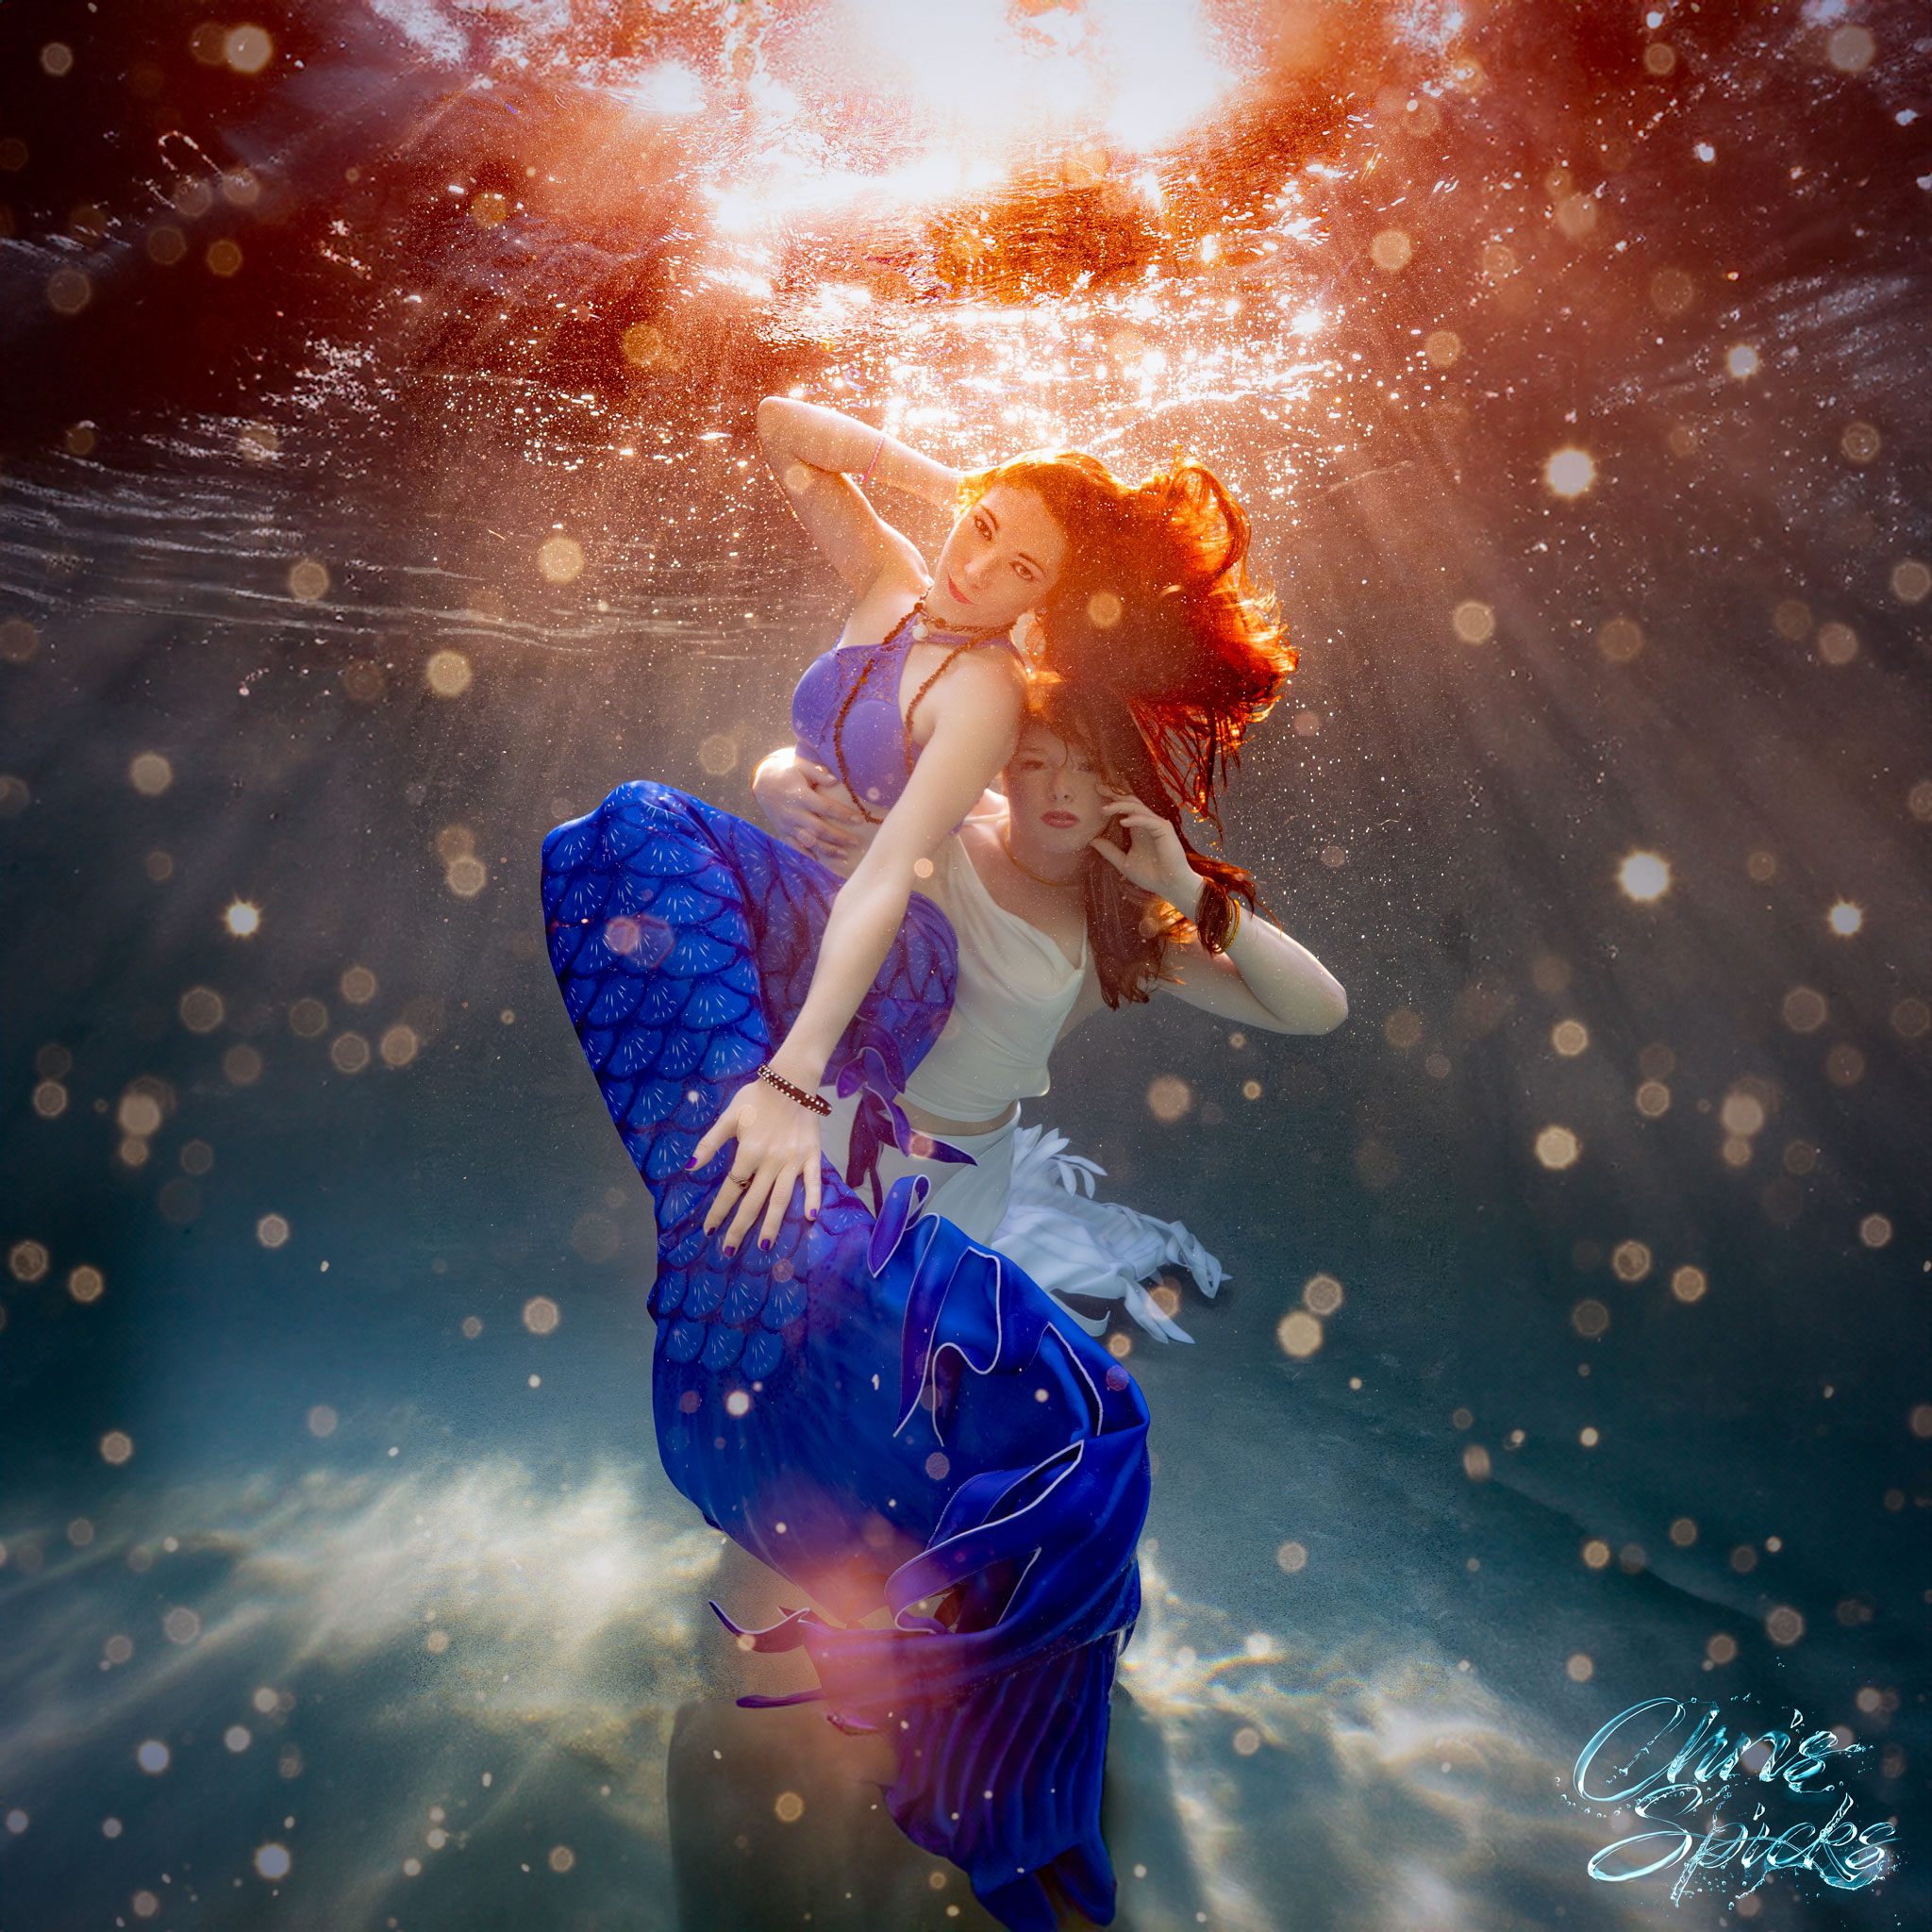 Two women, one dressed as a mermaid in a blue tail and the other in white, swim underwater with sunlight filtering through, creating a magical atmosphere.